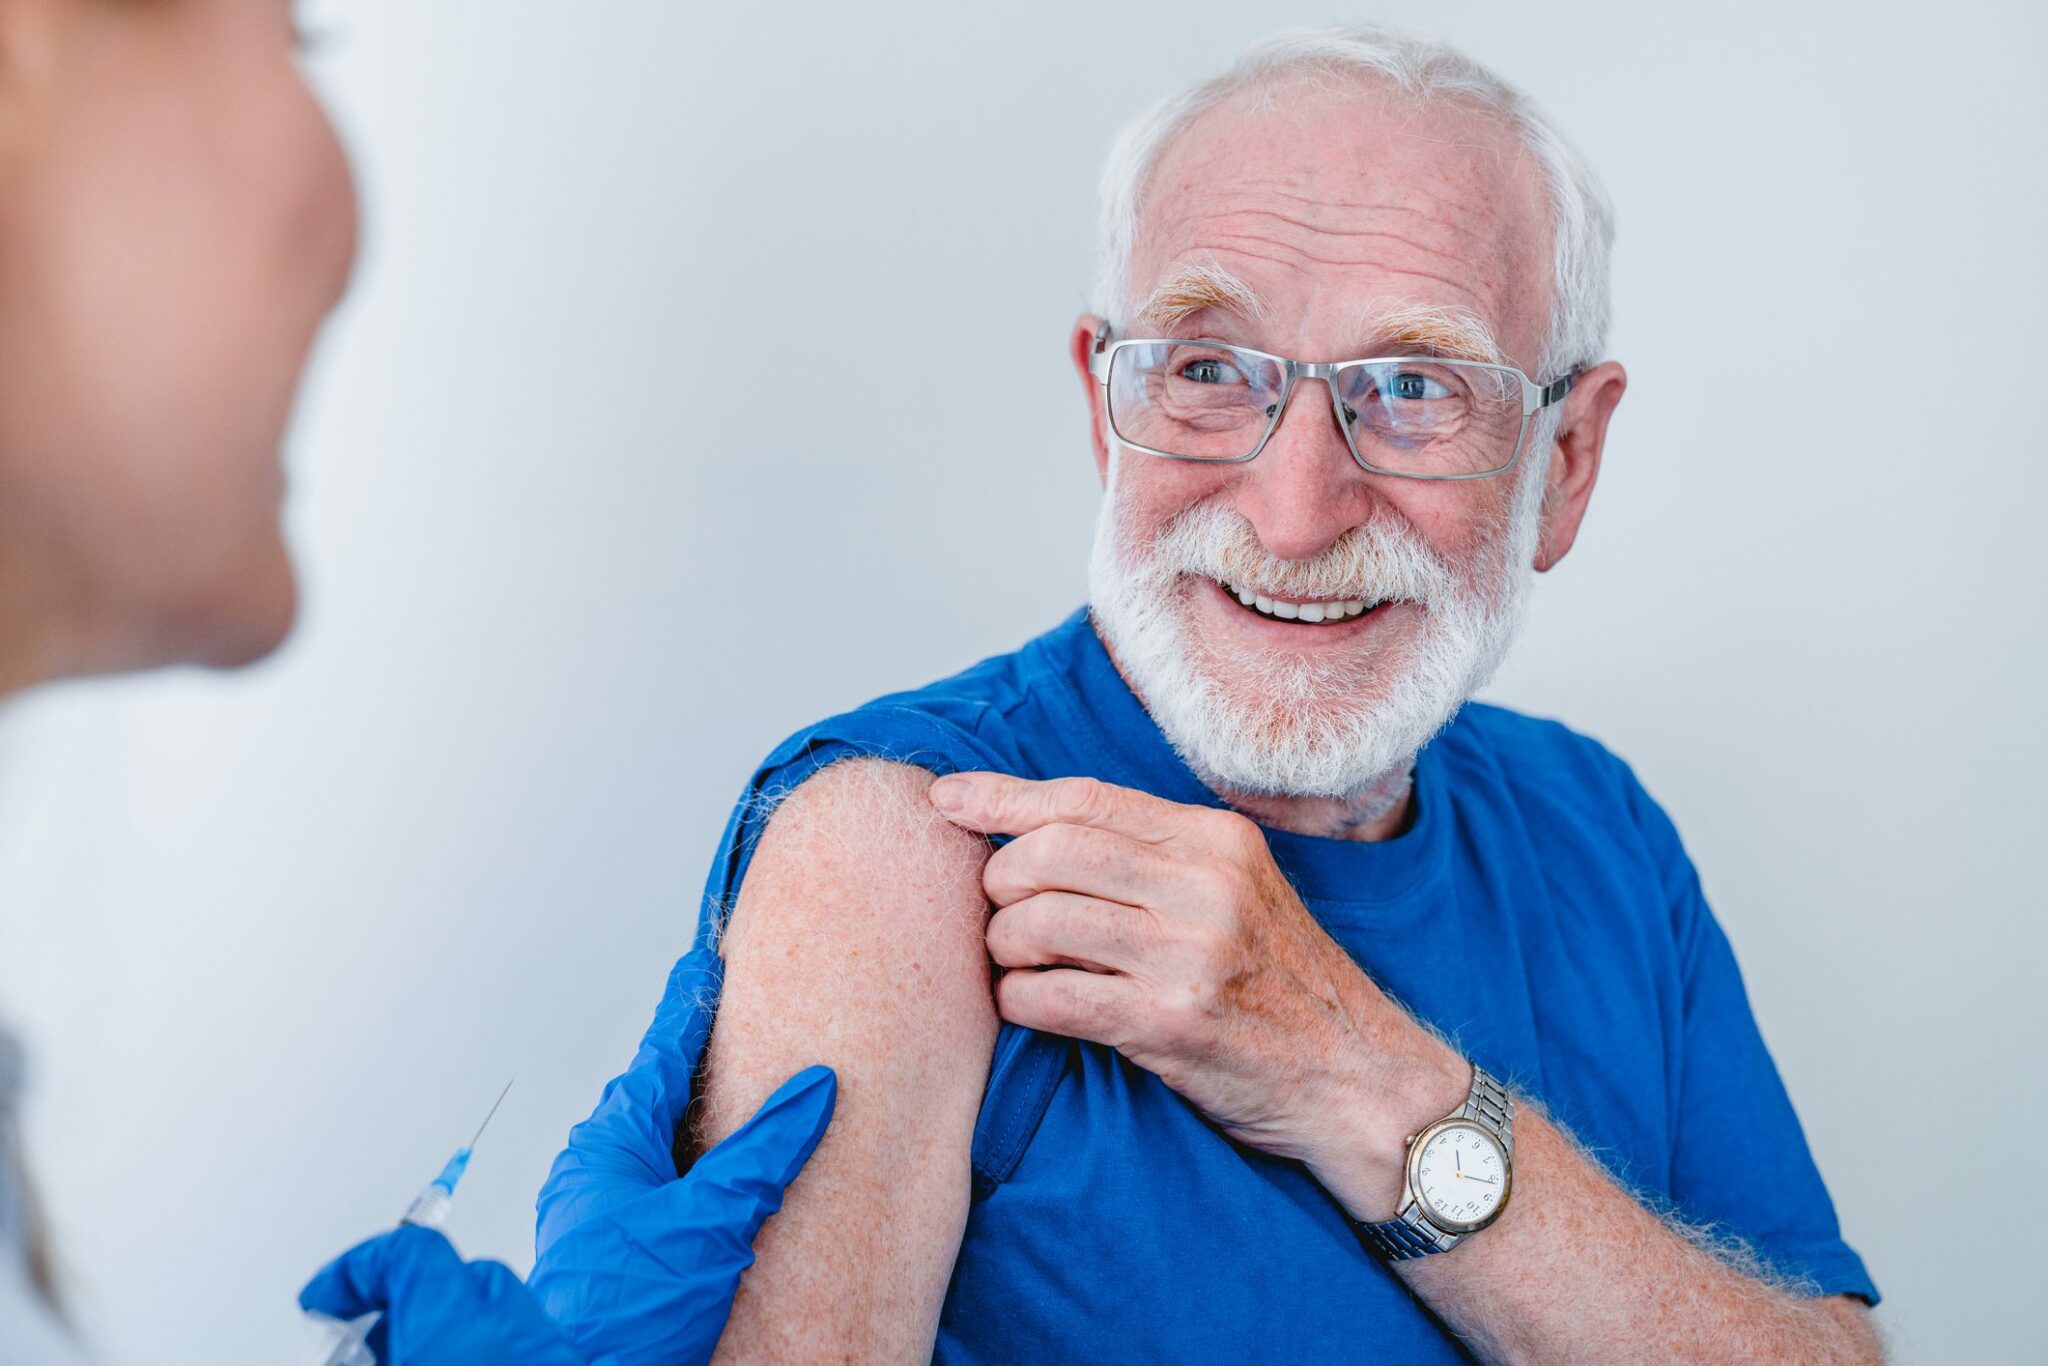 5 Frequently Asked Questions About Flu Shots and COVID19